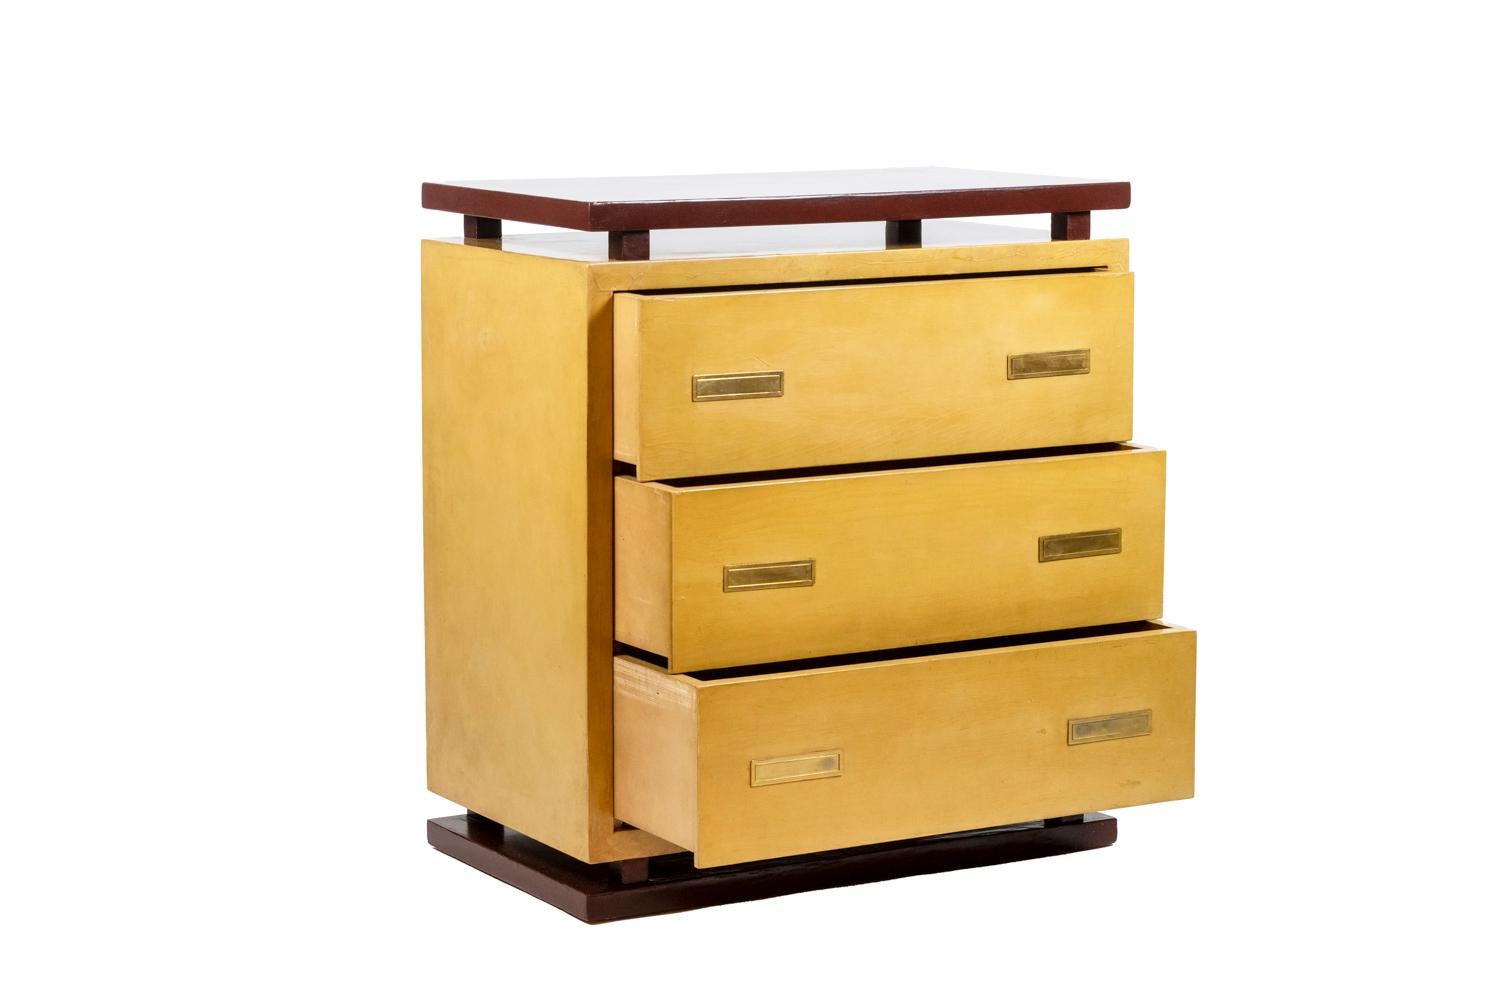 French Art Deco Style Lacquer Chest of Drawers, 1950s For Sale